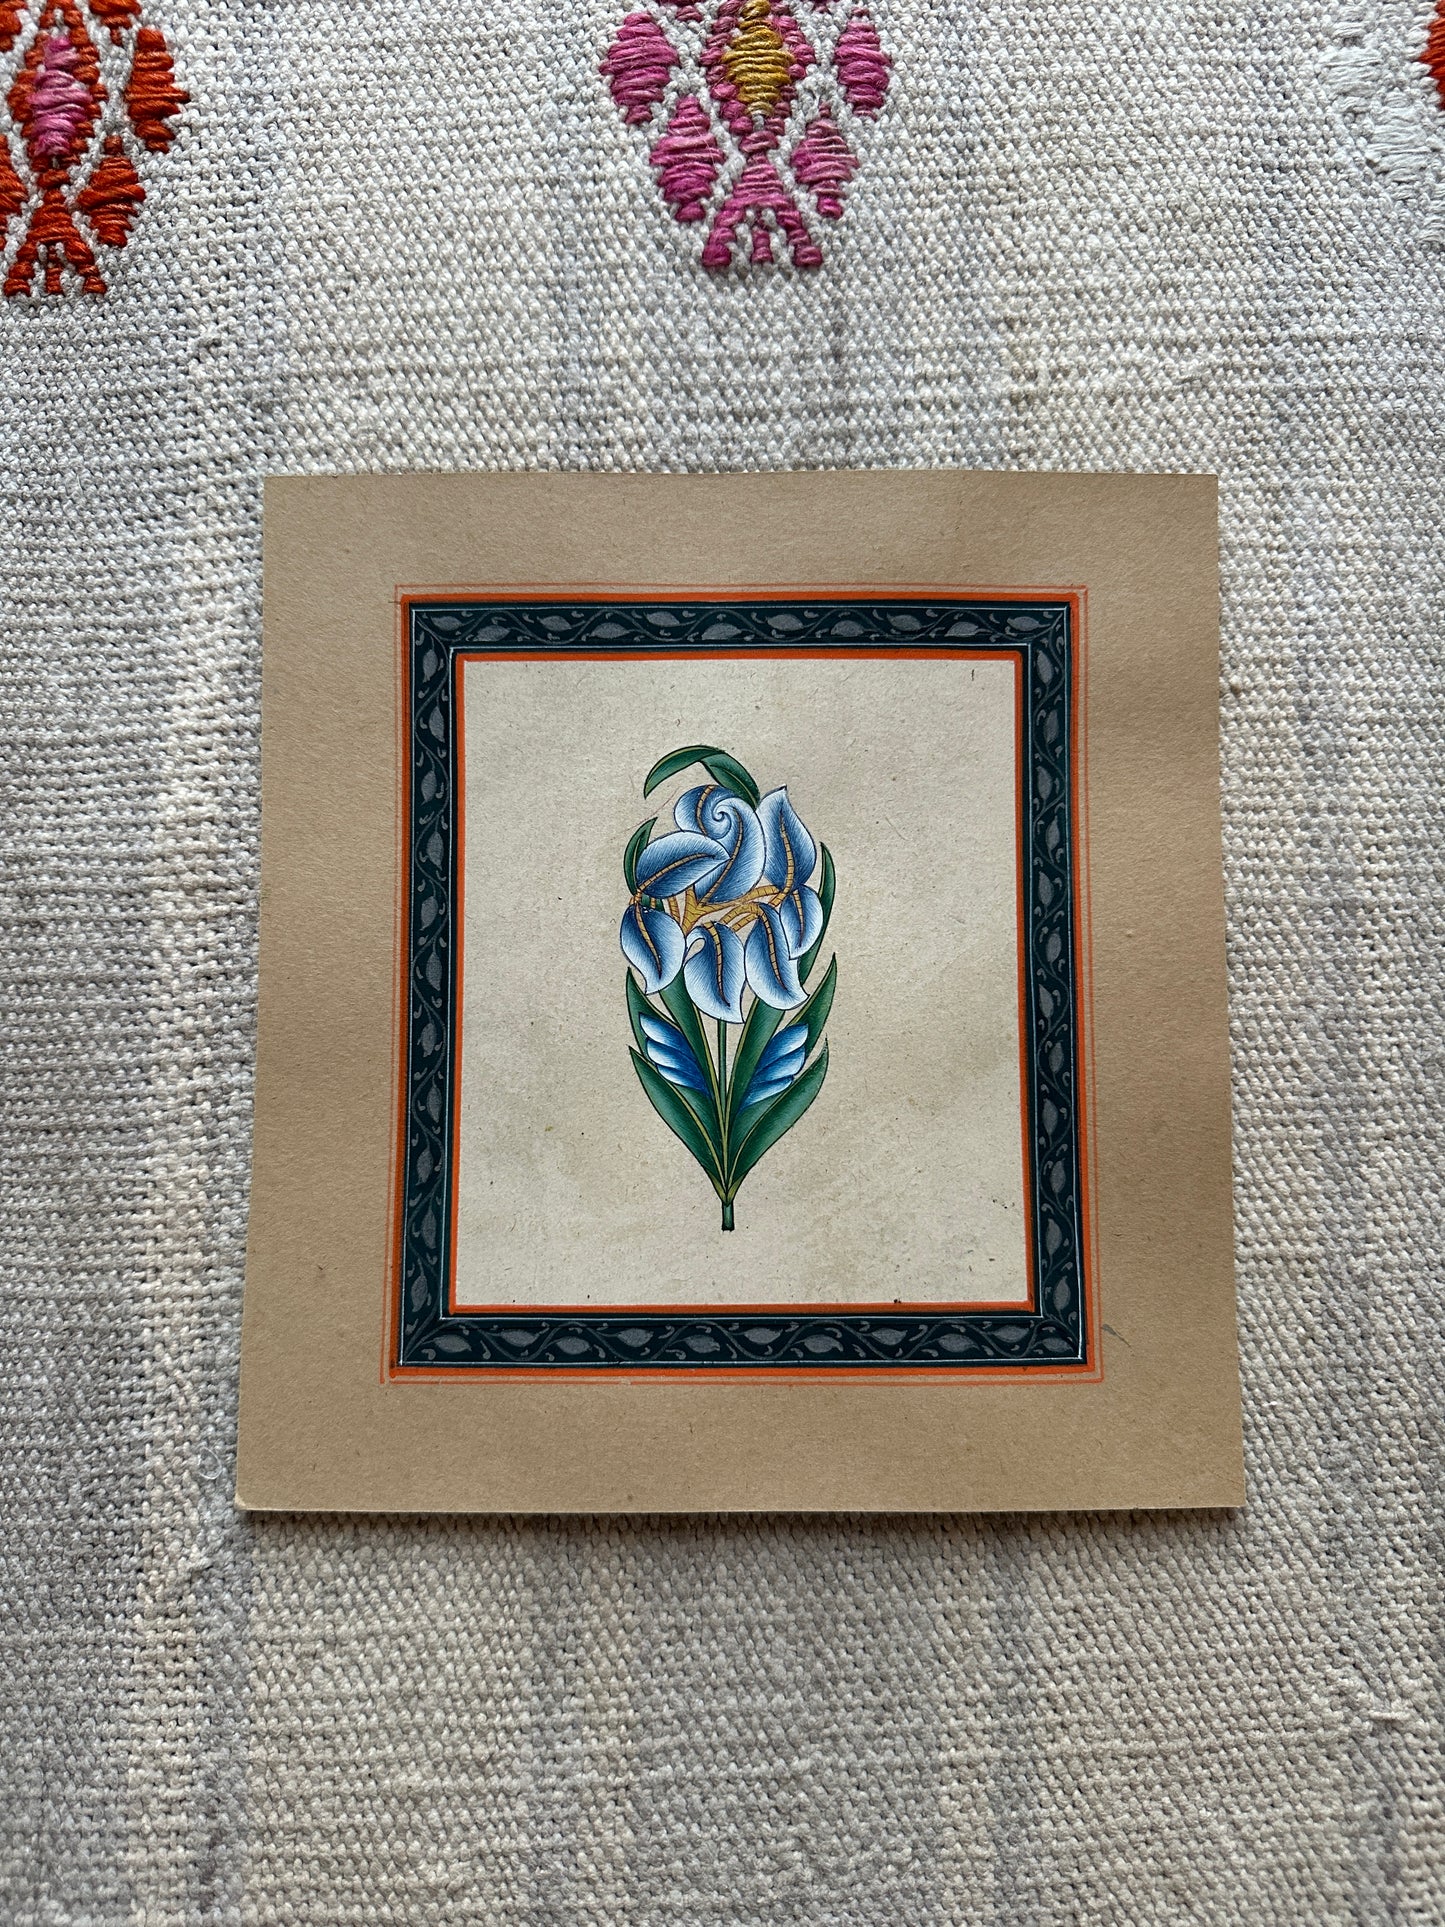 Flower Painting with Patterned Border (17)